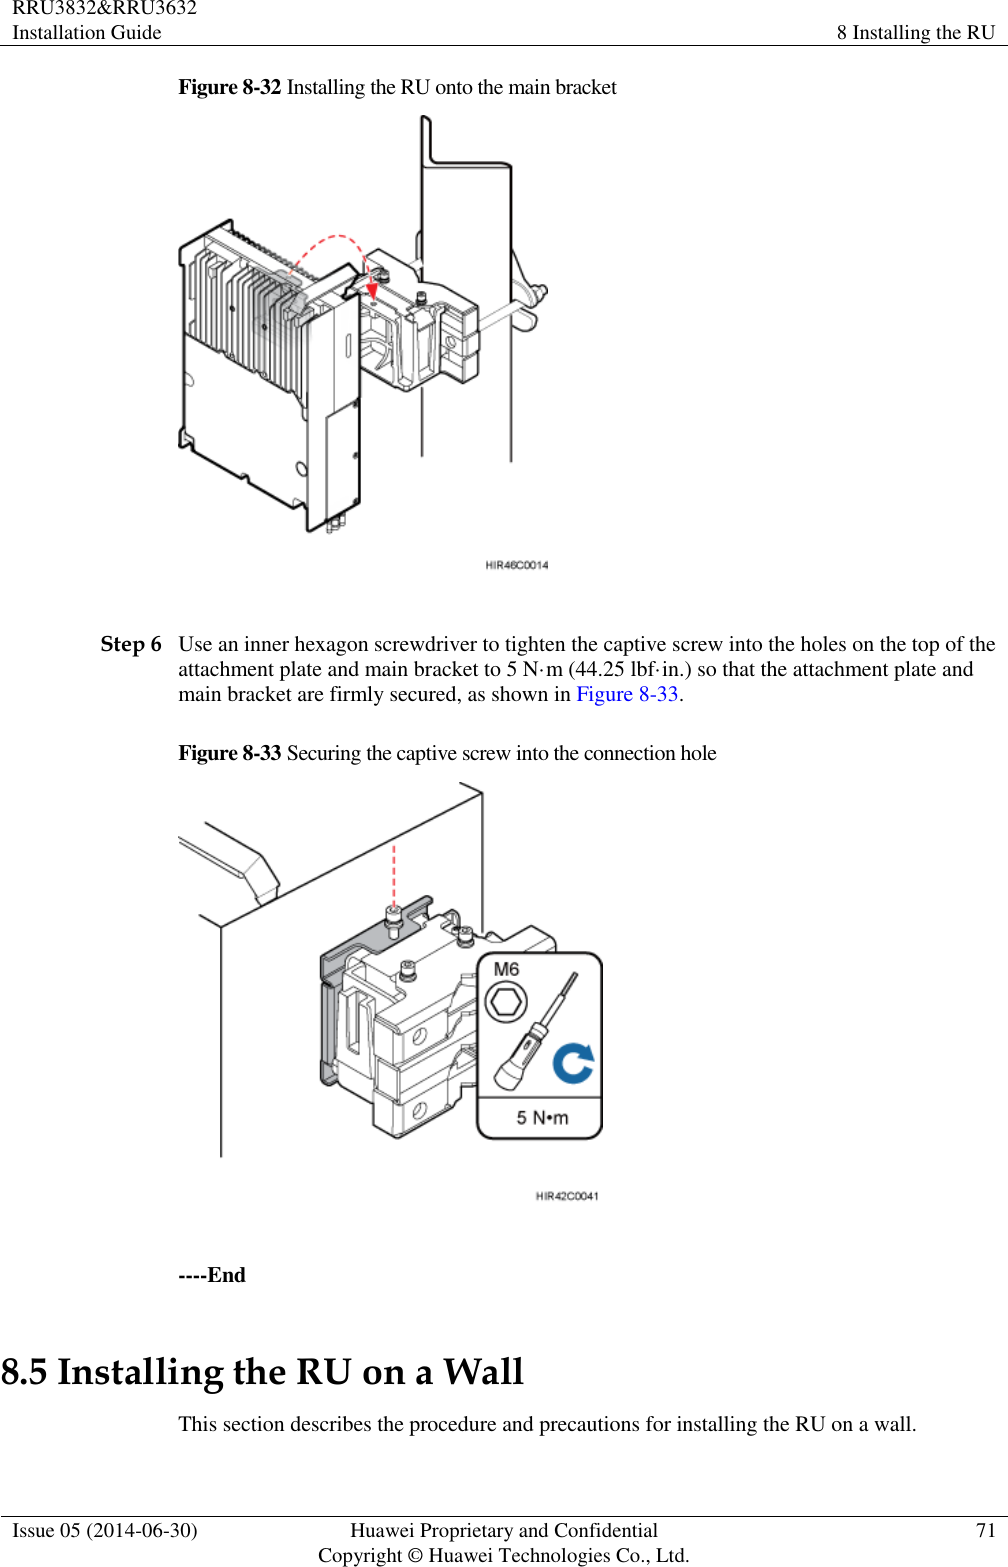 RRU3832&amp;RRU3632 Installation Guide 8 Installing the RU  Issue 05 (2014-06-30) Huawei Proprietary and Confidential                                     Copyright © Huawei Technologies Co., Ltd. 71  Figure 8-32 Installing the RU onto the main bracket   Step 6 Use an inner hexagon screwdriver to tighten the captive screw into the holes on the top of the attachment plate and main bracket to 5 N·m (44.25 lbf·in.) so that the attachment plate and main bracket are firmly secured, as shown in Figure 8-33. Figure 8-33 Securing the captive screw into the connection hole   ----End 8.5 Installing the RU on a Wall This section describes the procedure and precautions for installing the RU on a wall. 